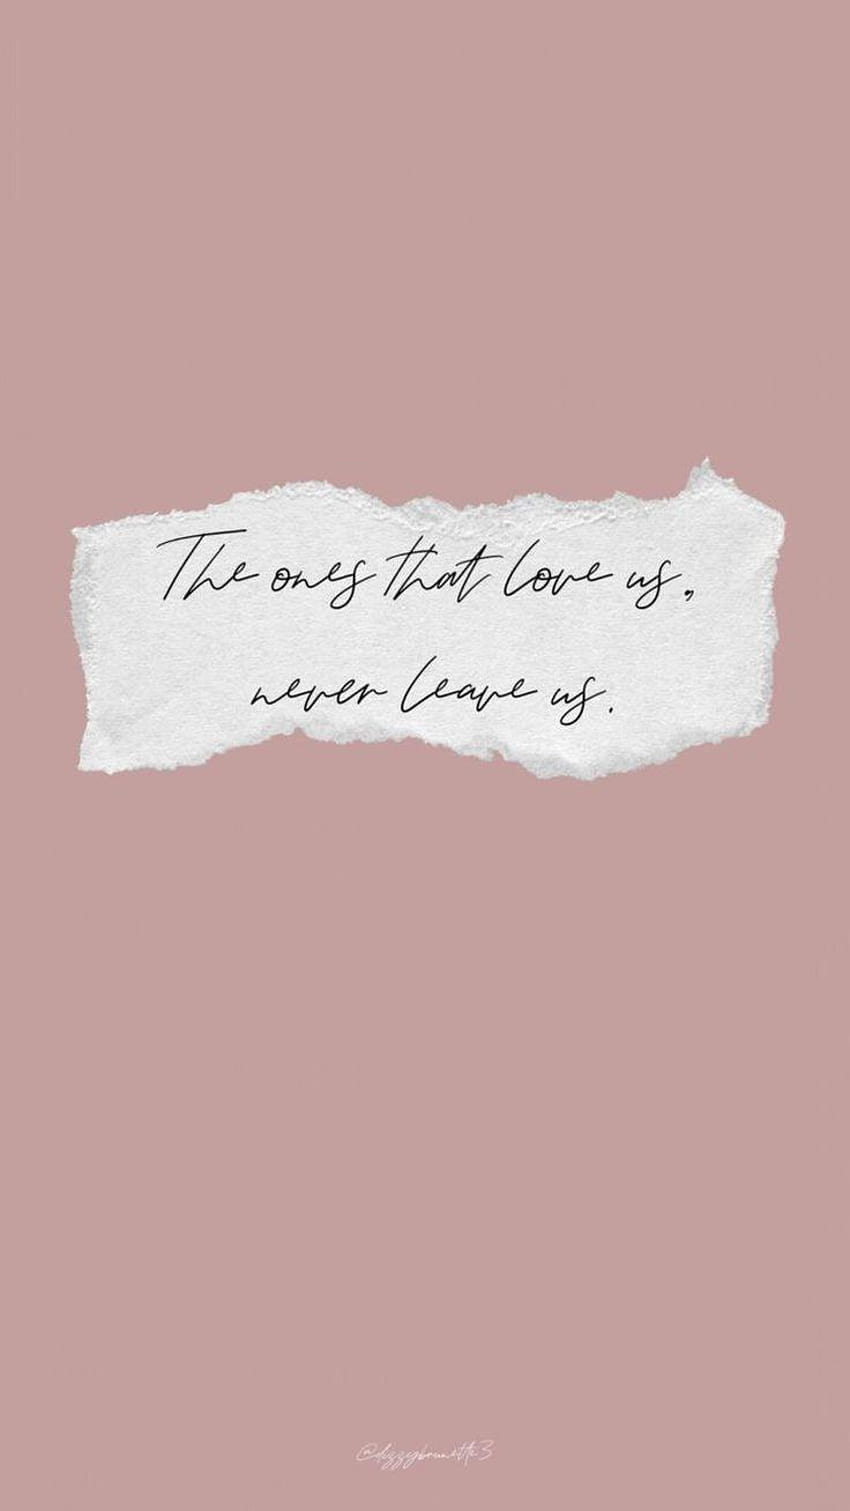 tumblr quote backgrounds for iphone